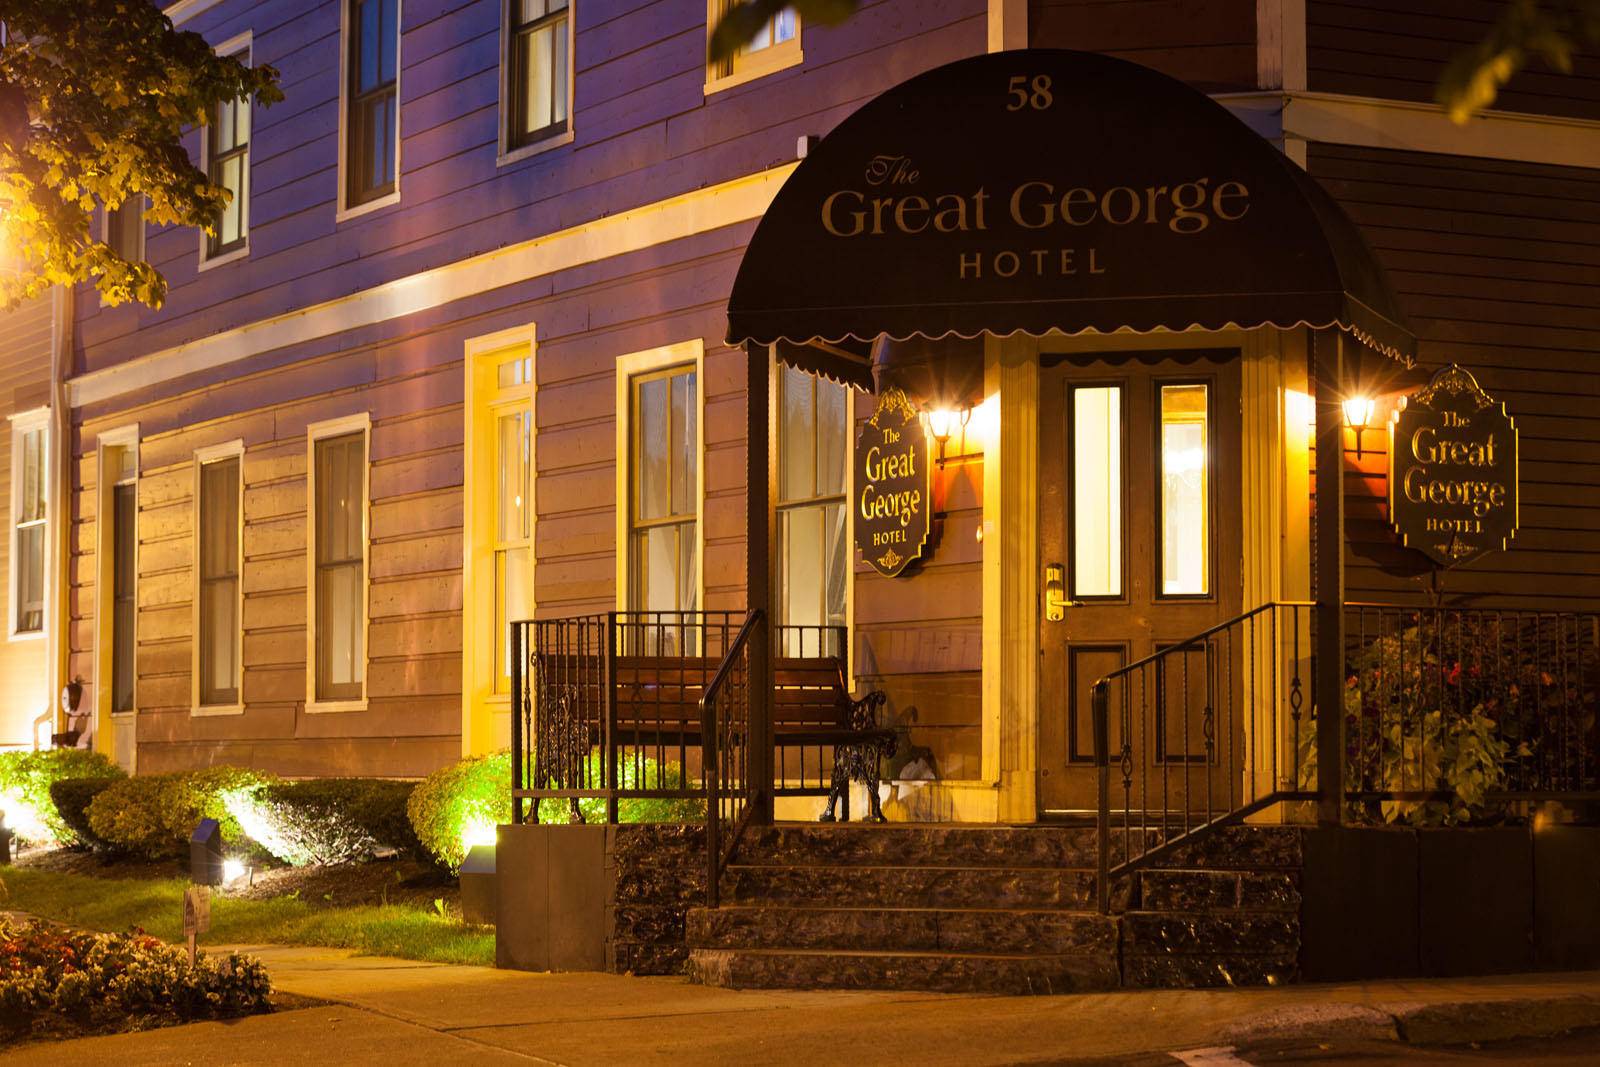 Facade of Great George Hotel